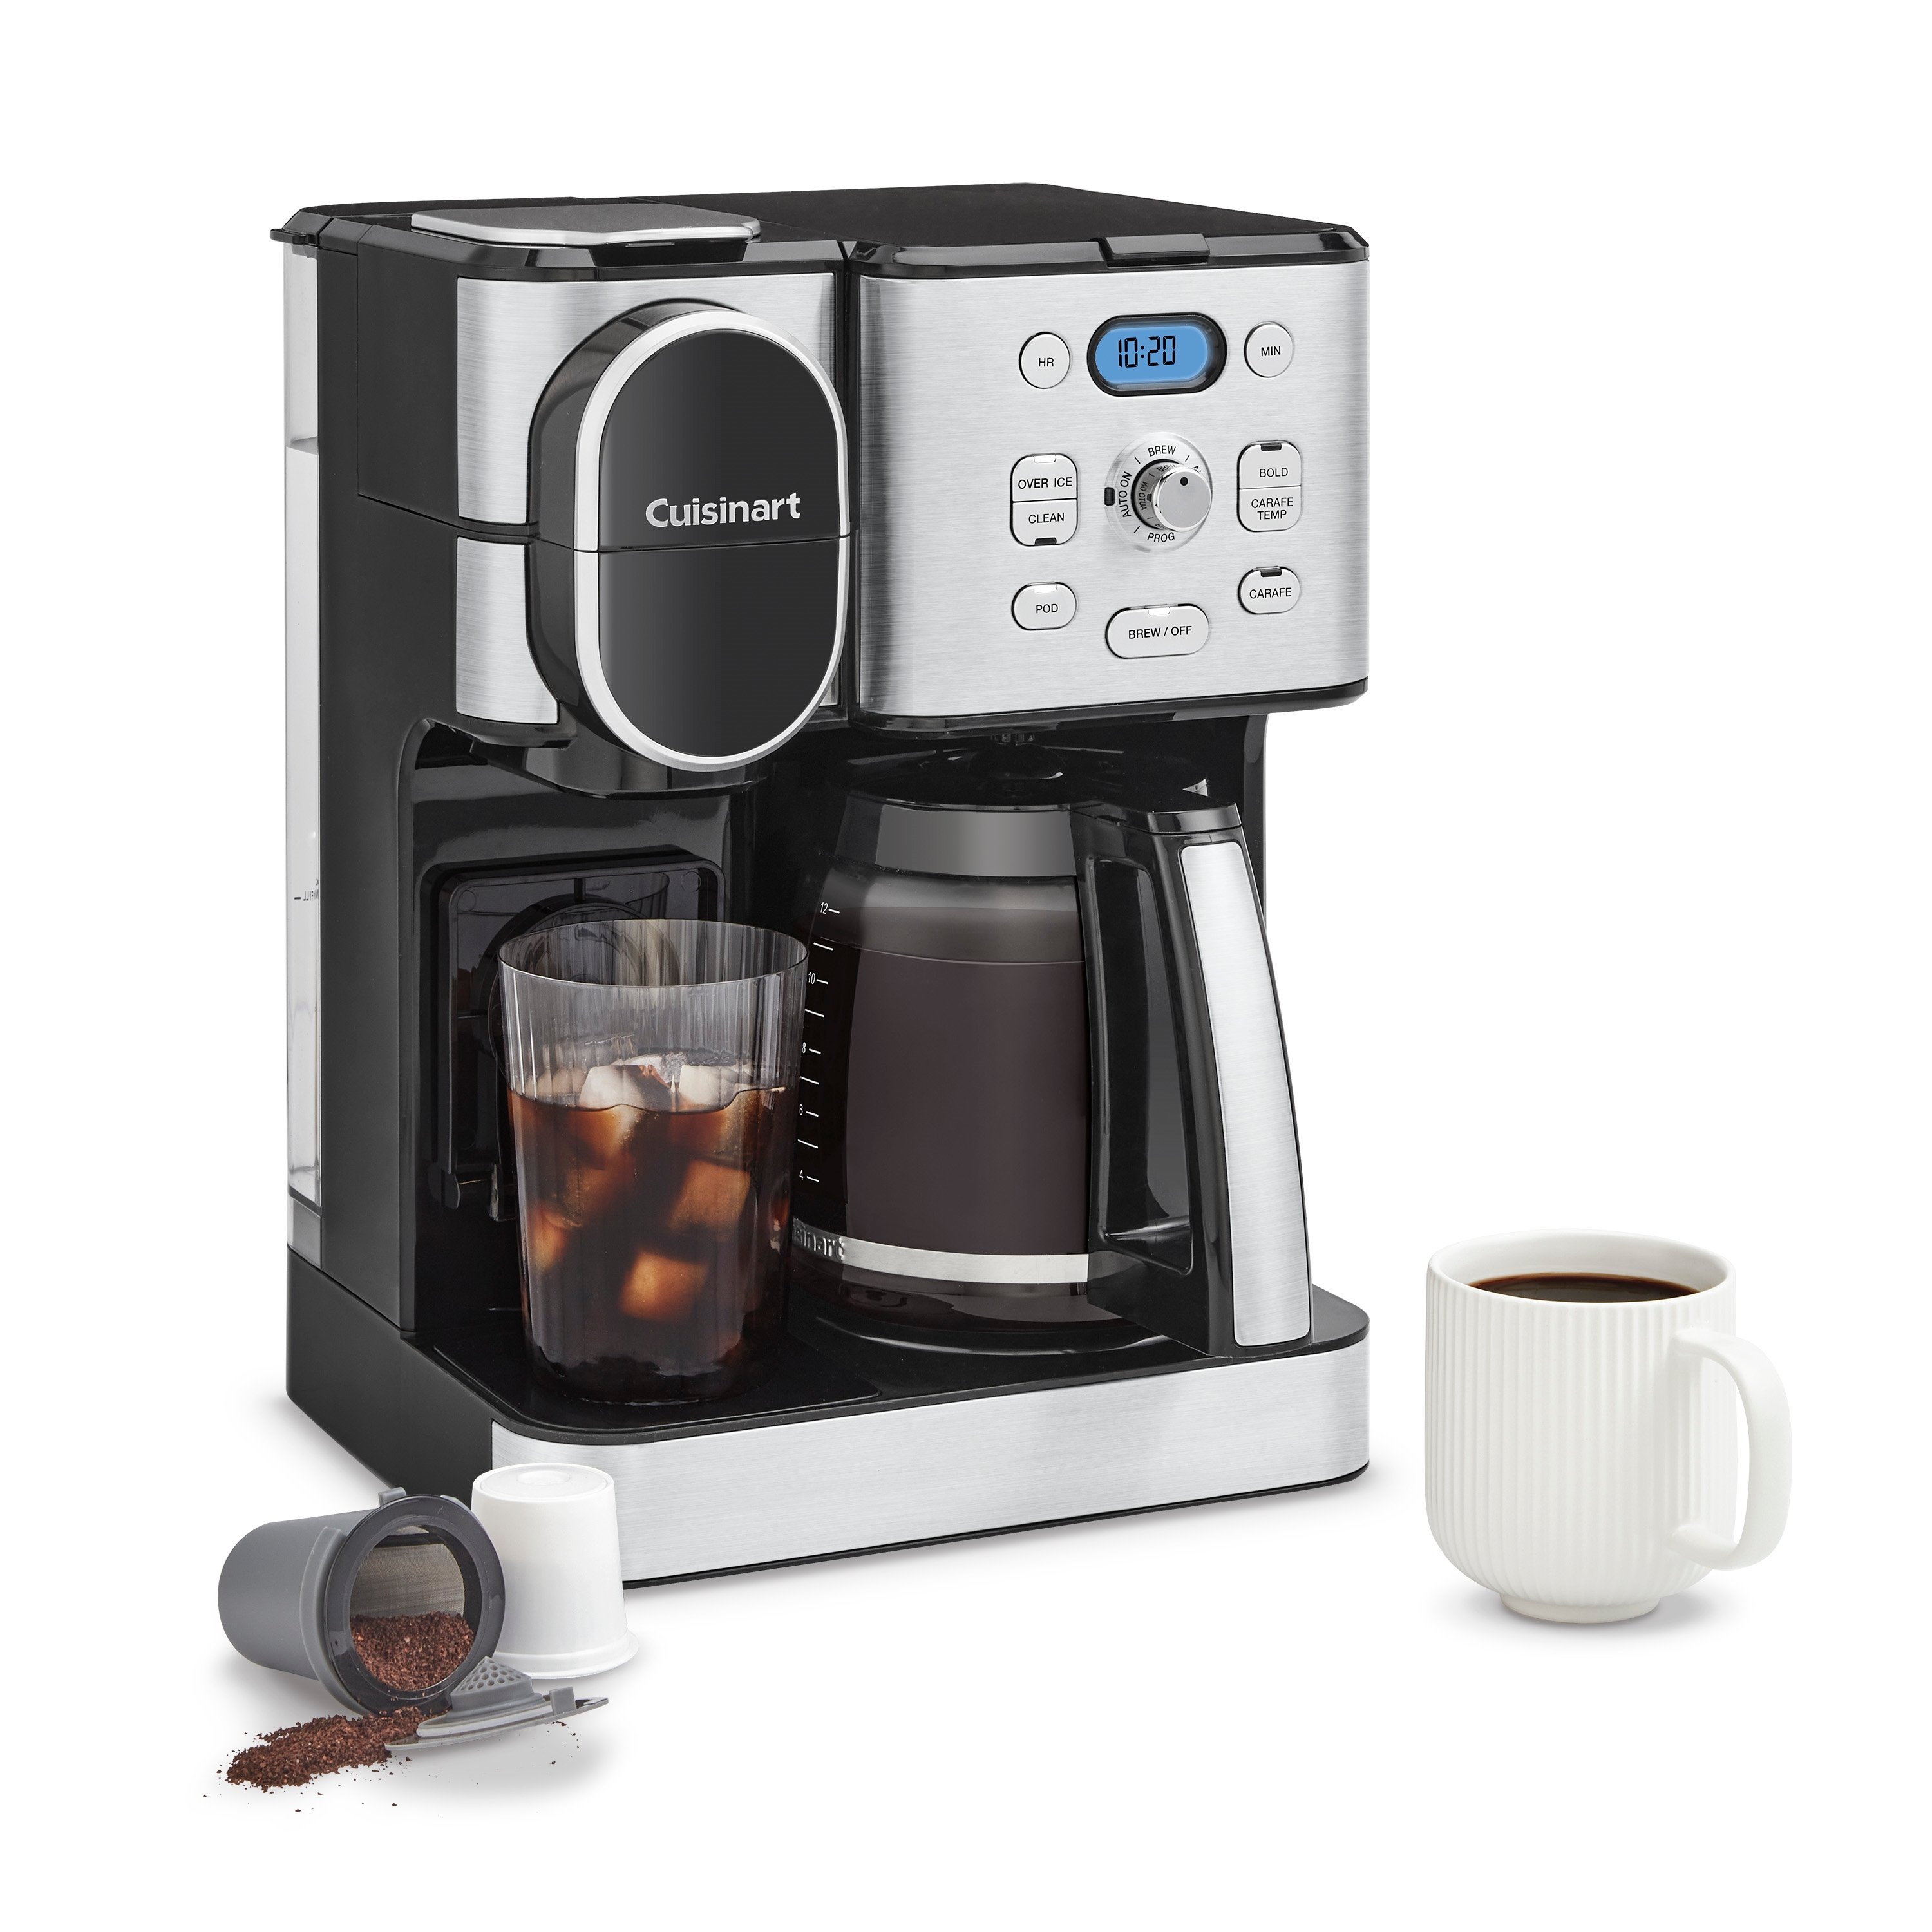  Keurig K-Duo Coffee Maker, Single Serve K-Cup Pod and 12 Cup  Carafe Brewer, with Keurig Station K-Cup Pod & Ground Coffee Storage Unit,  Black: Home & Kitchen